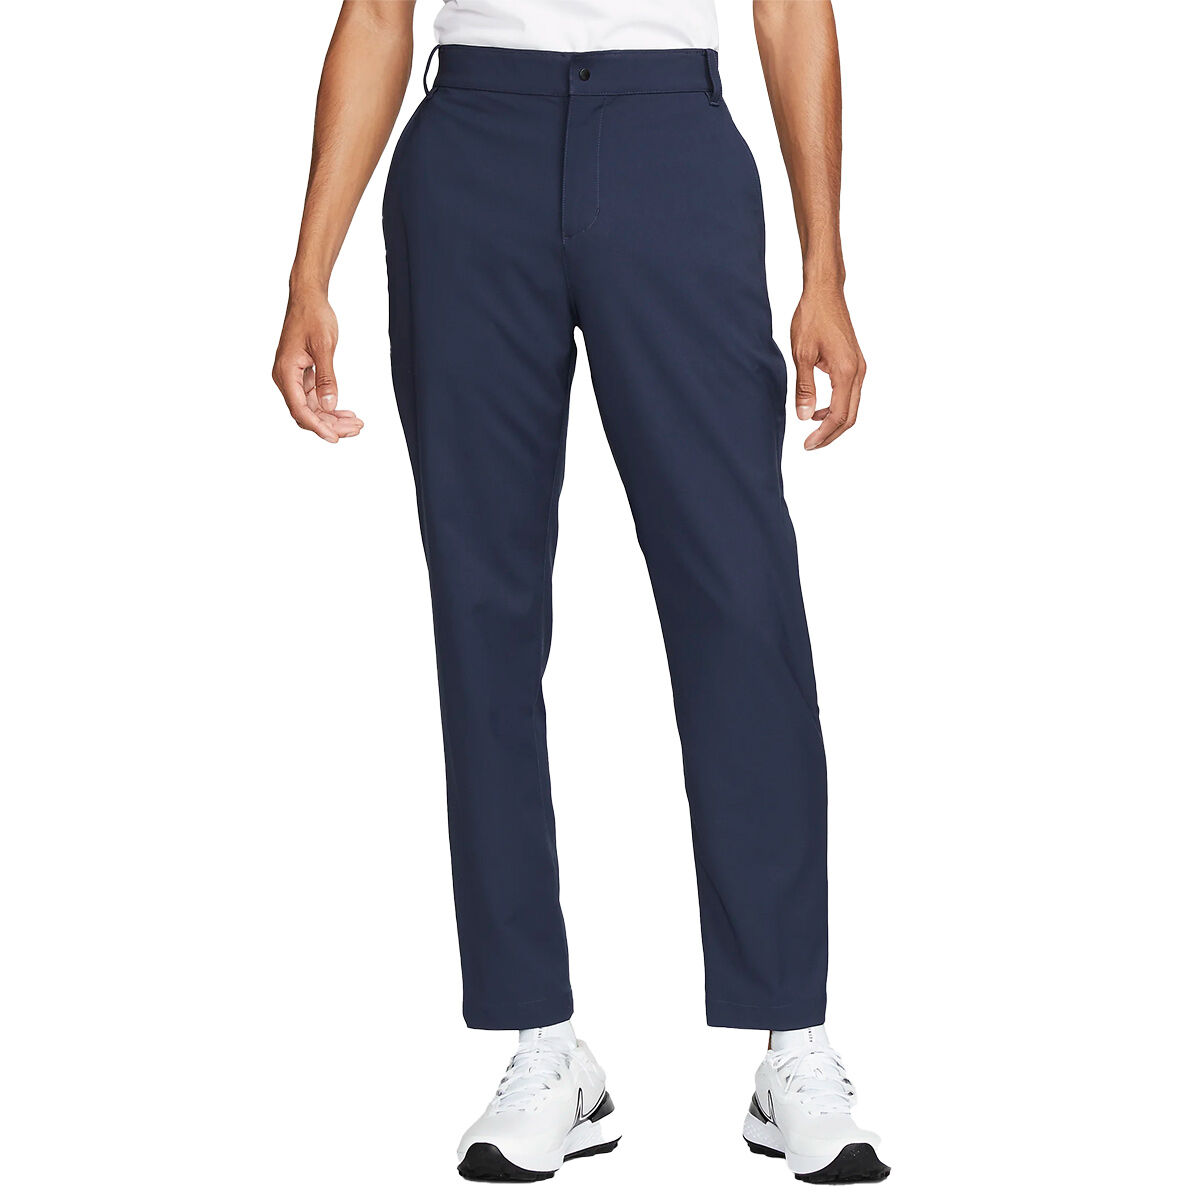 Nike Men's Victory Dri-FIT Golf Trousers, Mens, Obsidian, 32, Long | American Golf - Father's Day Gift von Nike Golf